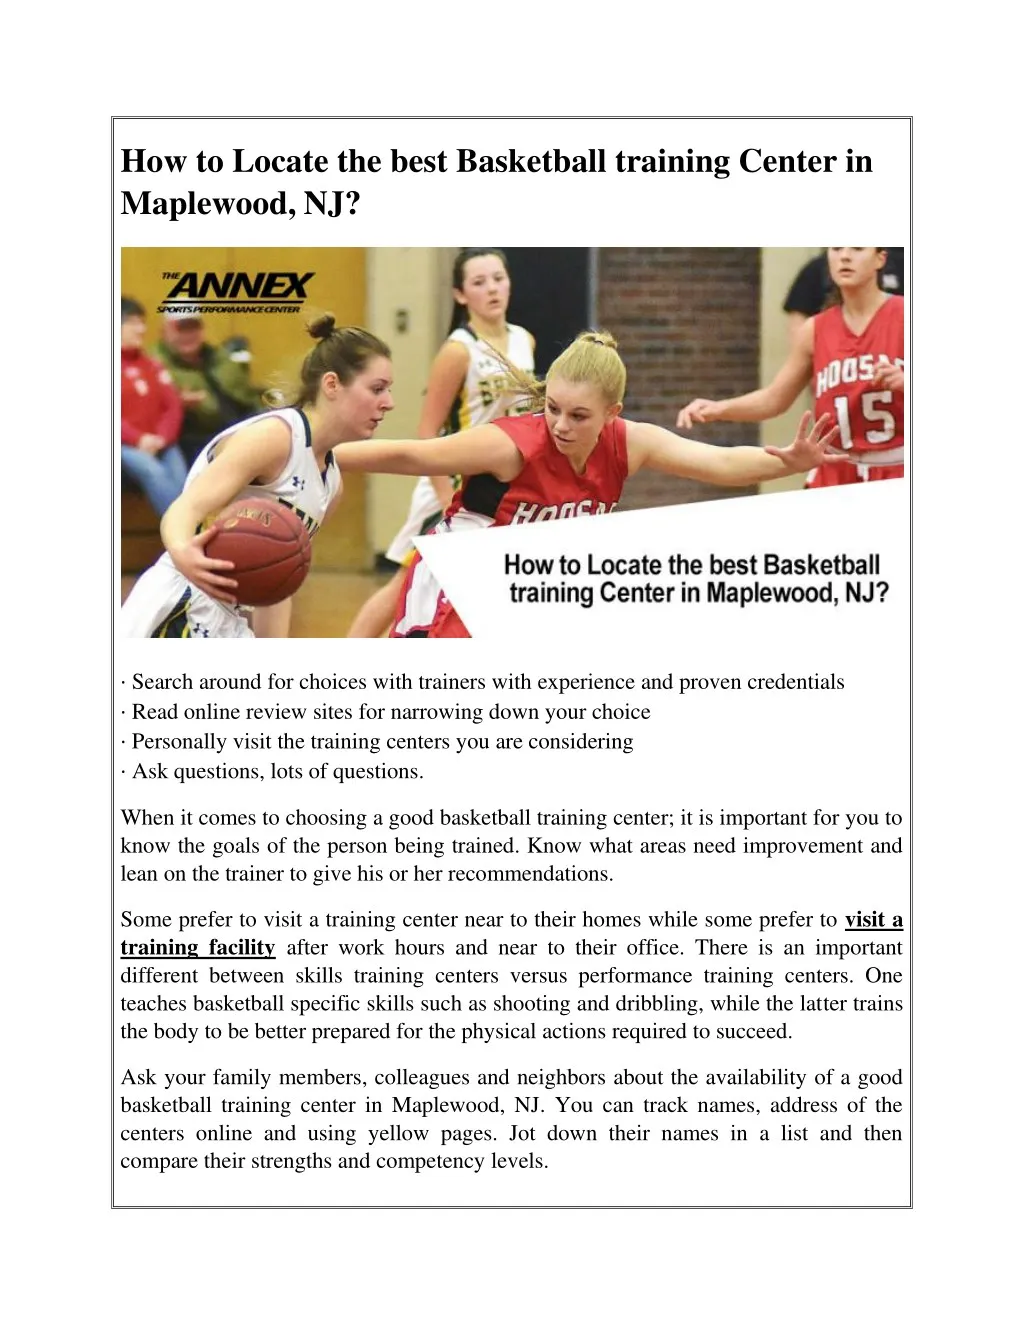 how to locate the best basketball training center